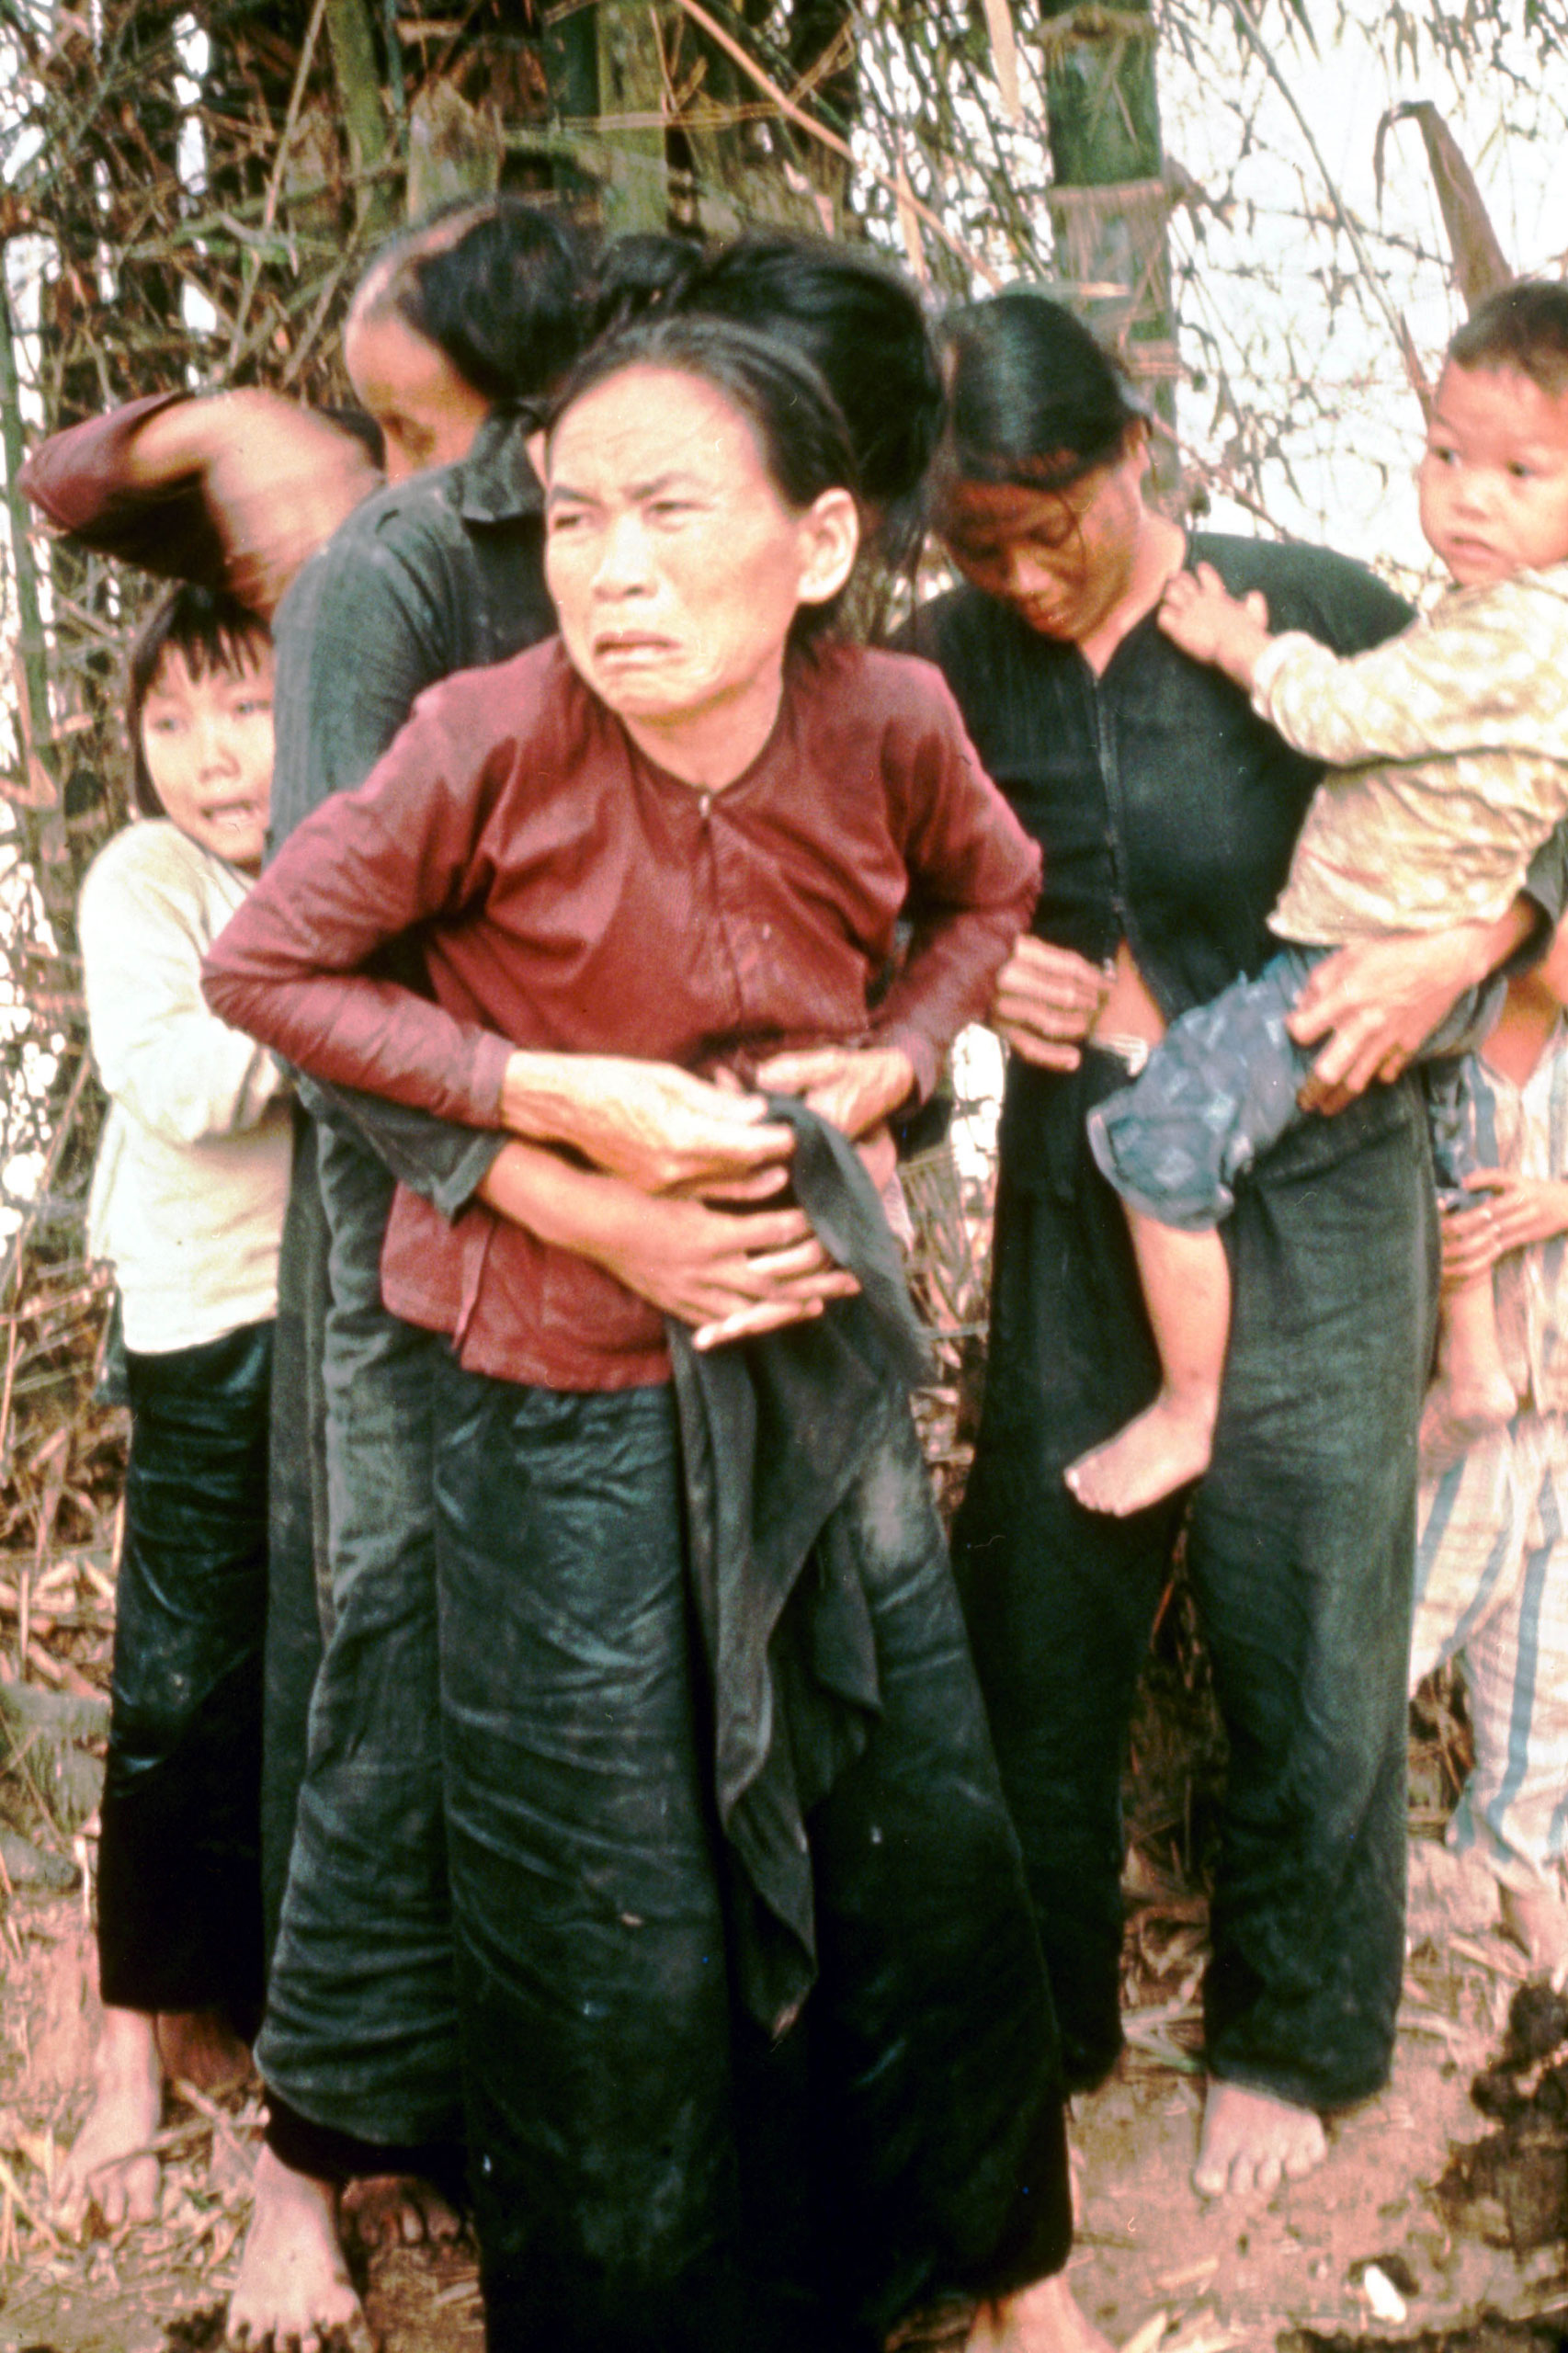 A group of women and children huddle in terror moments before being murdered by American troops in the village of My Lai, Vietnam, March 16, 1968.